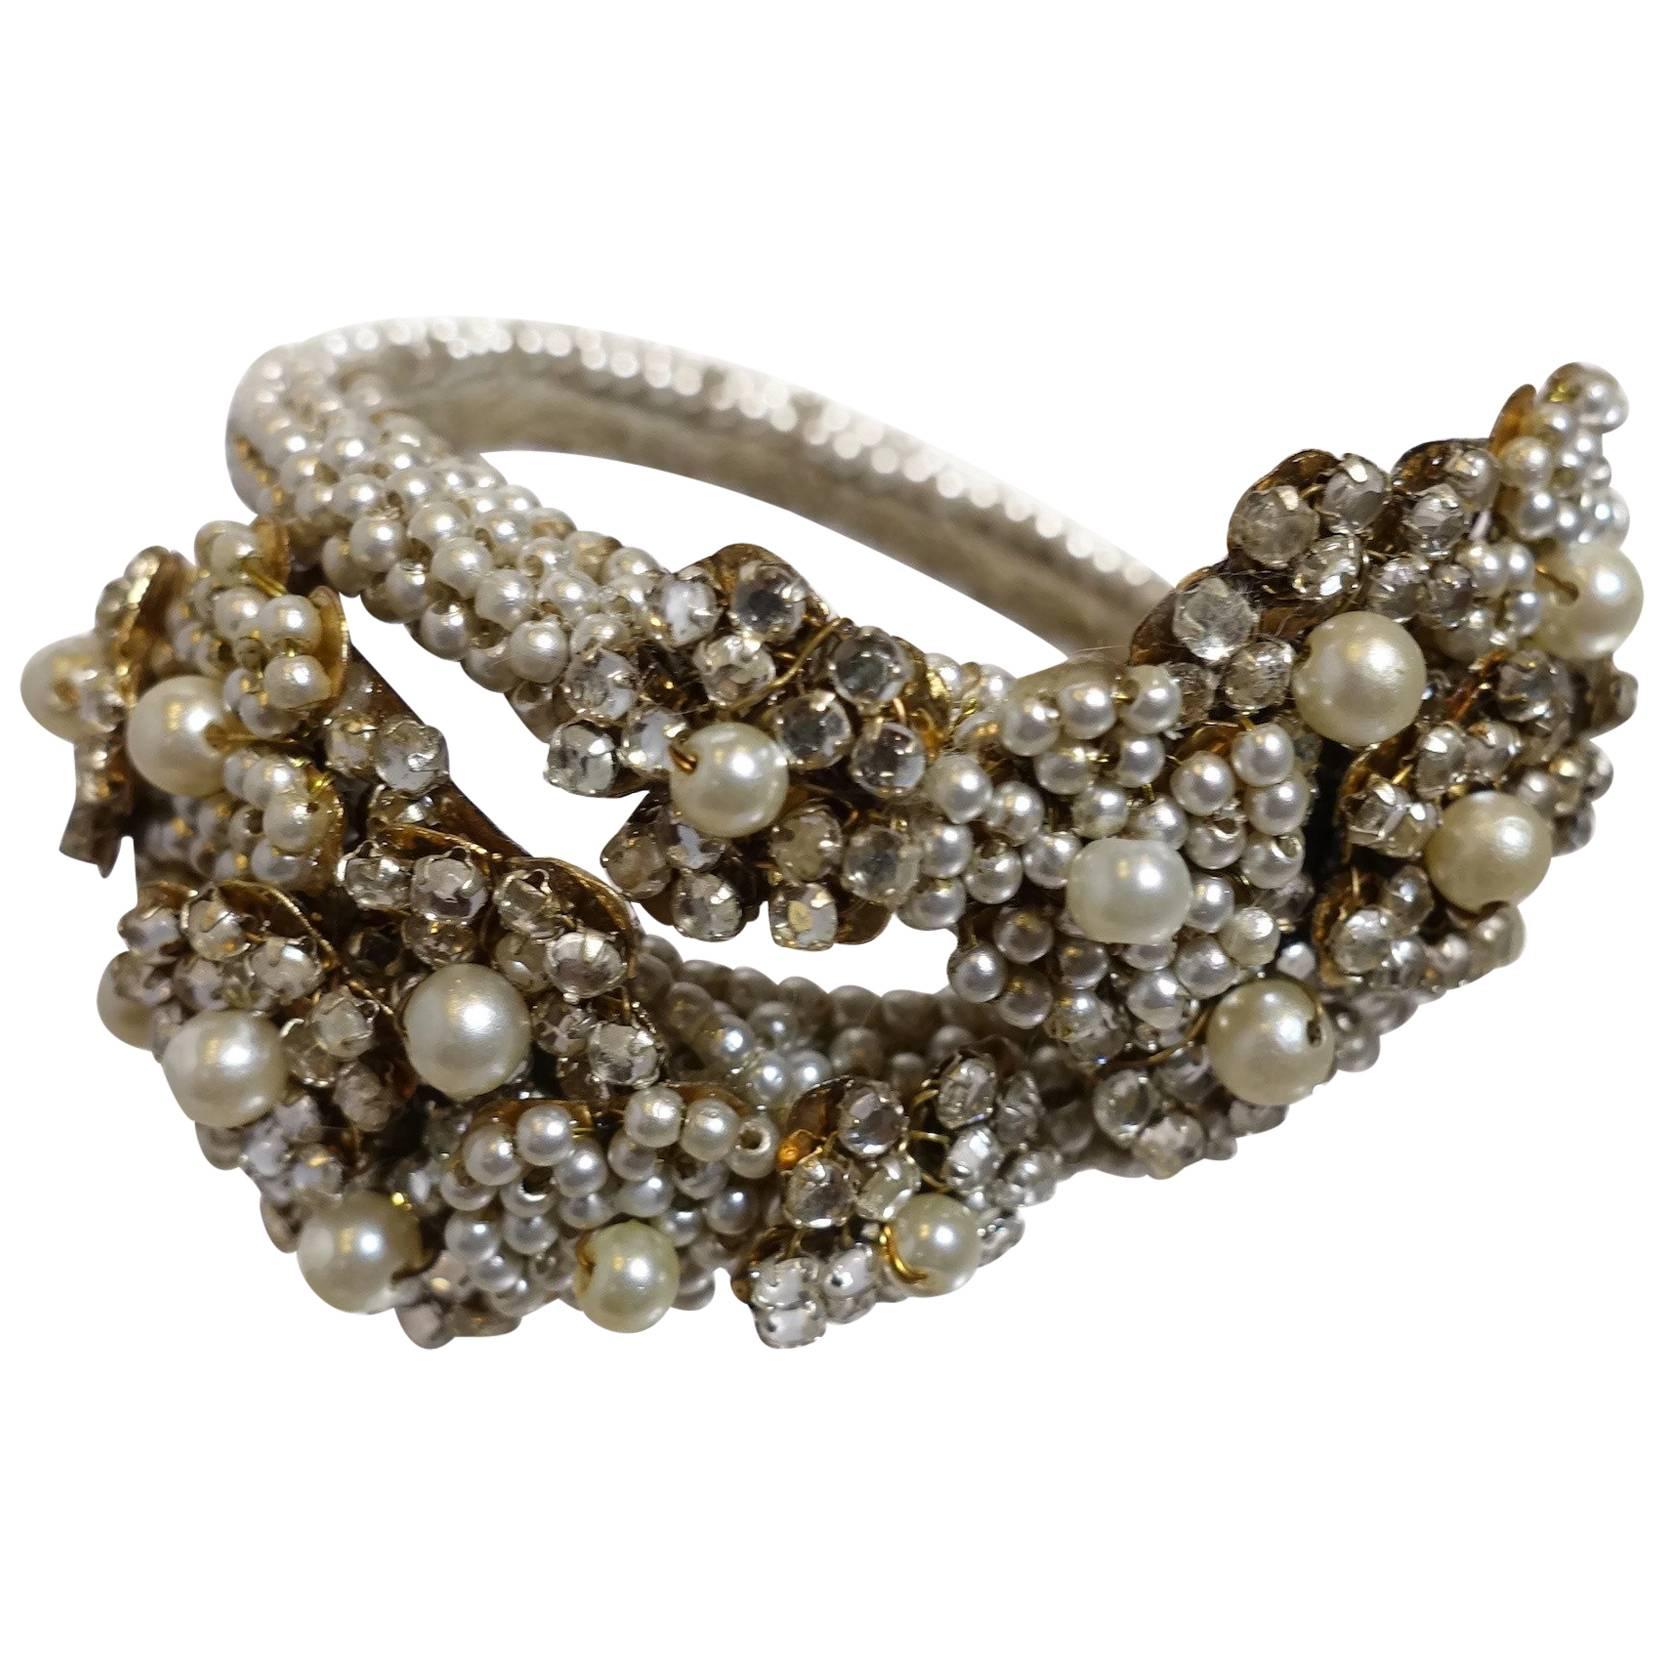 Early 1930s Vintage Miriam Haskell Faux Pearl & Crystals Wrap Bracelet